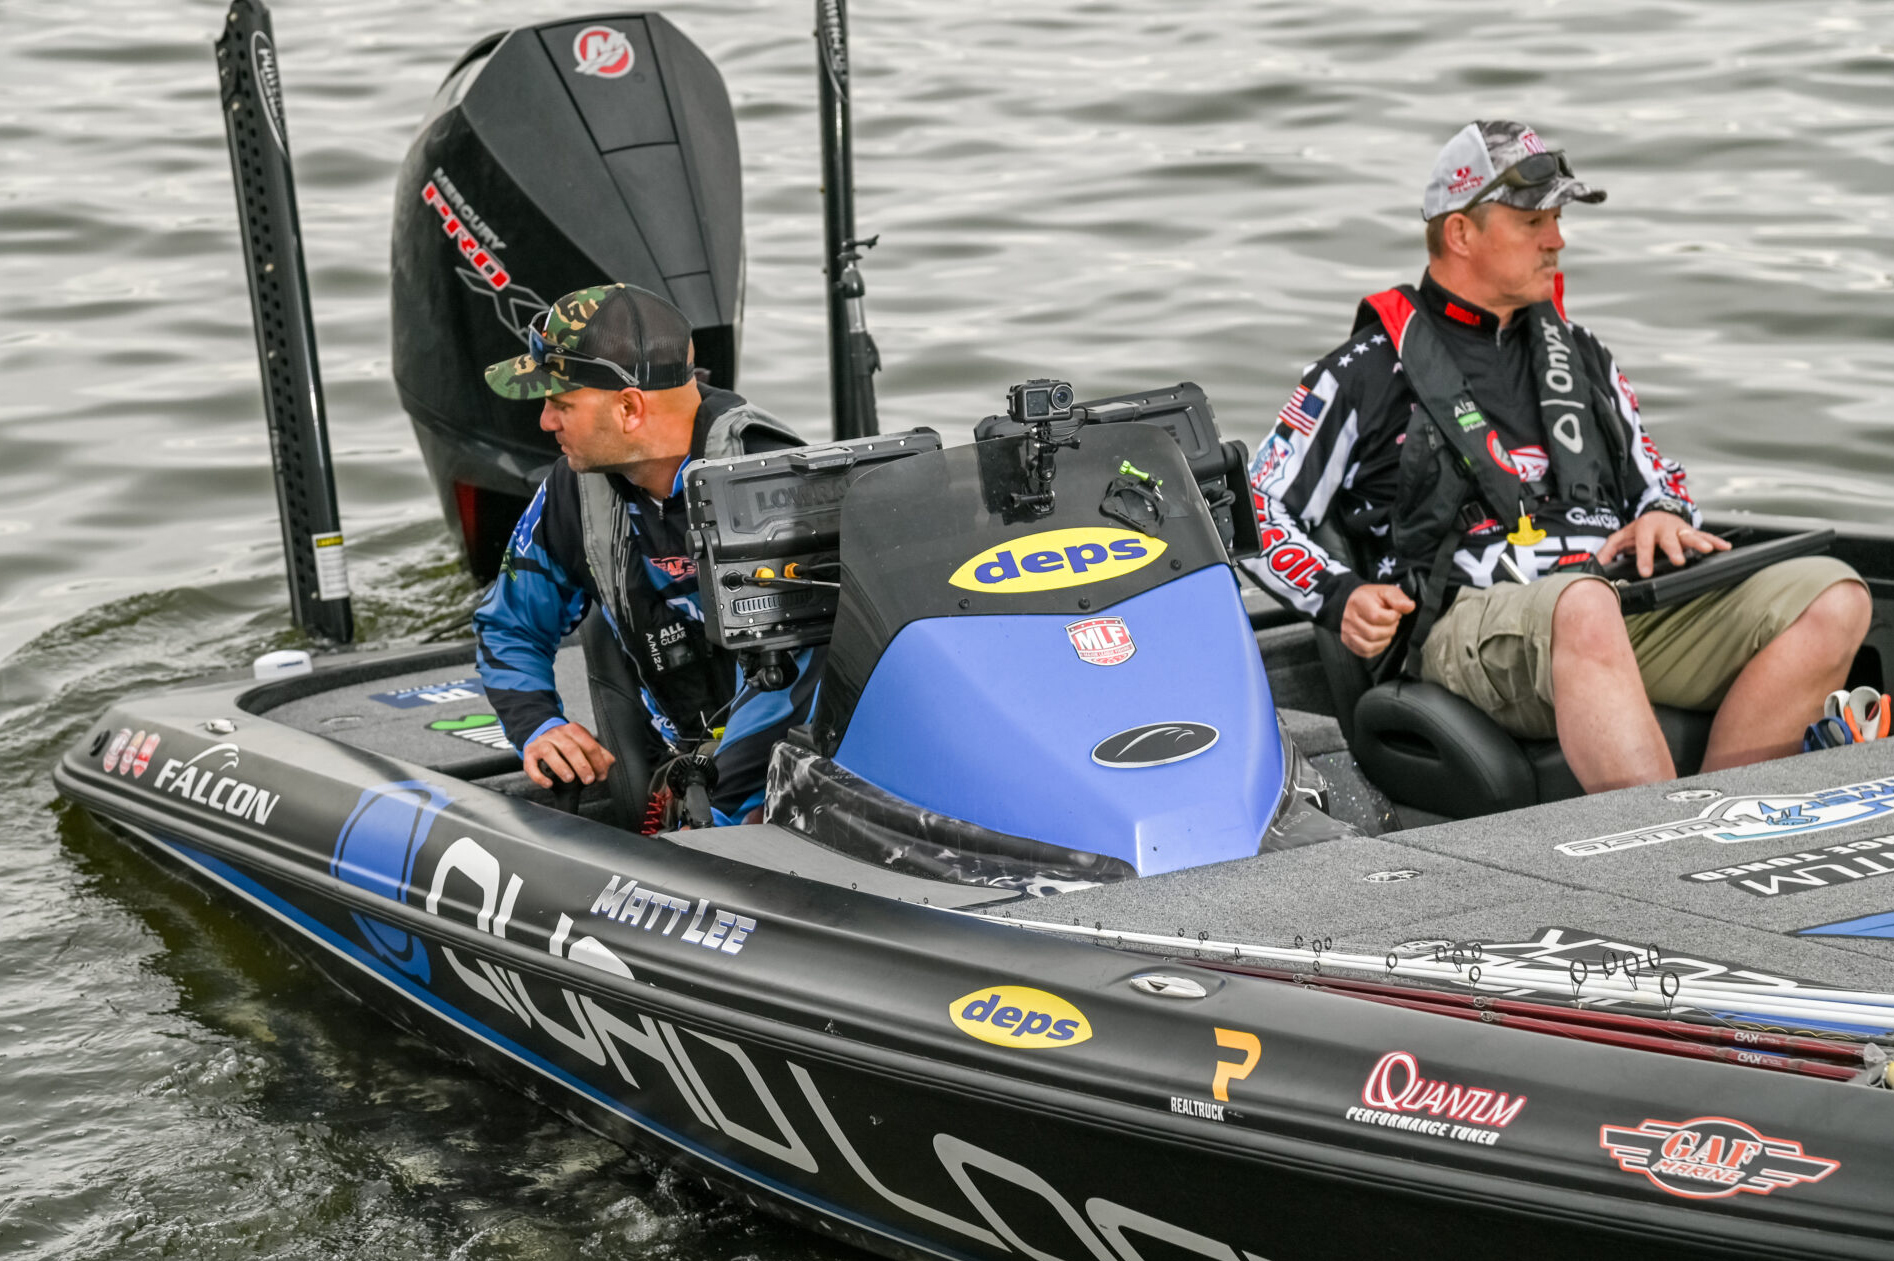 From Kayak to Bass Boat - Major League Fishing